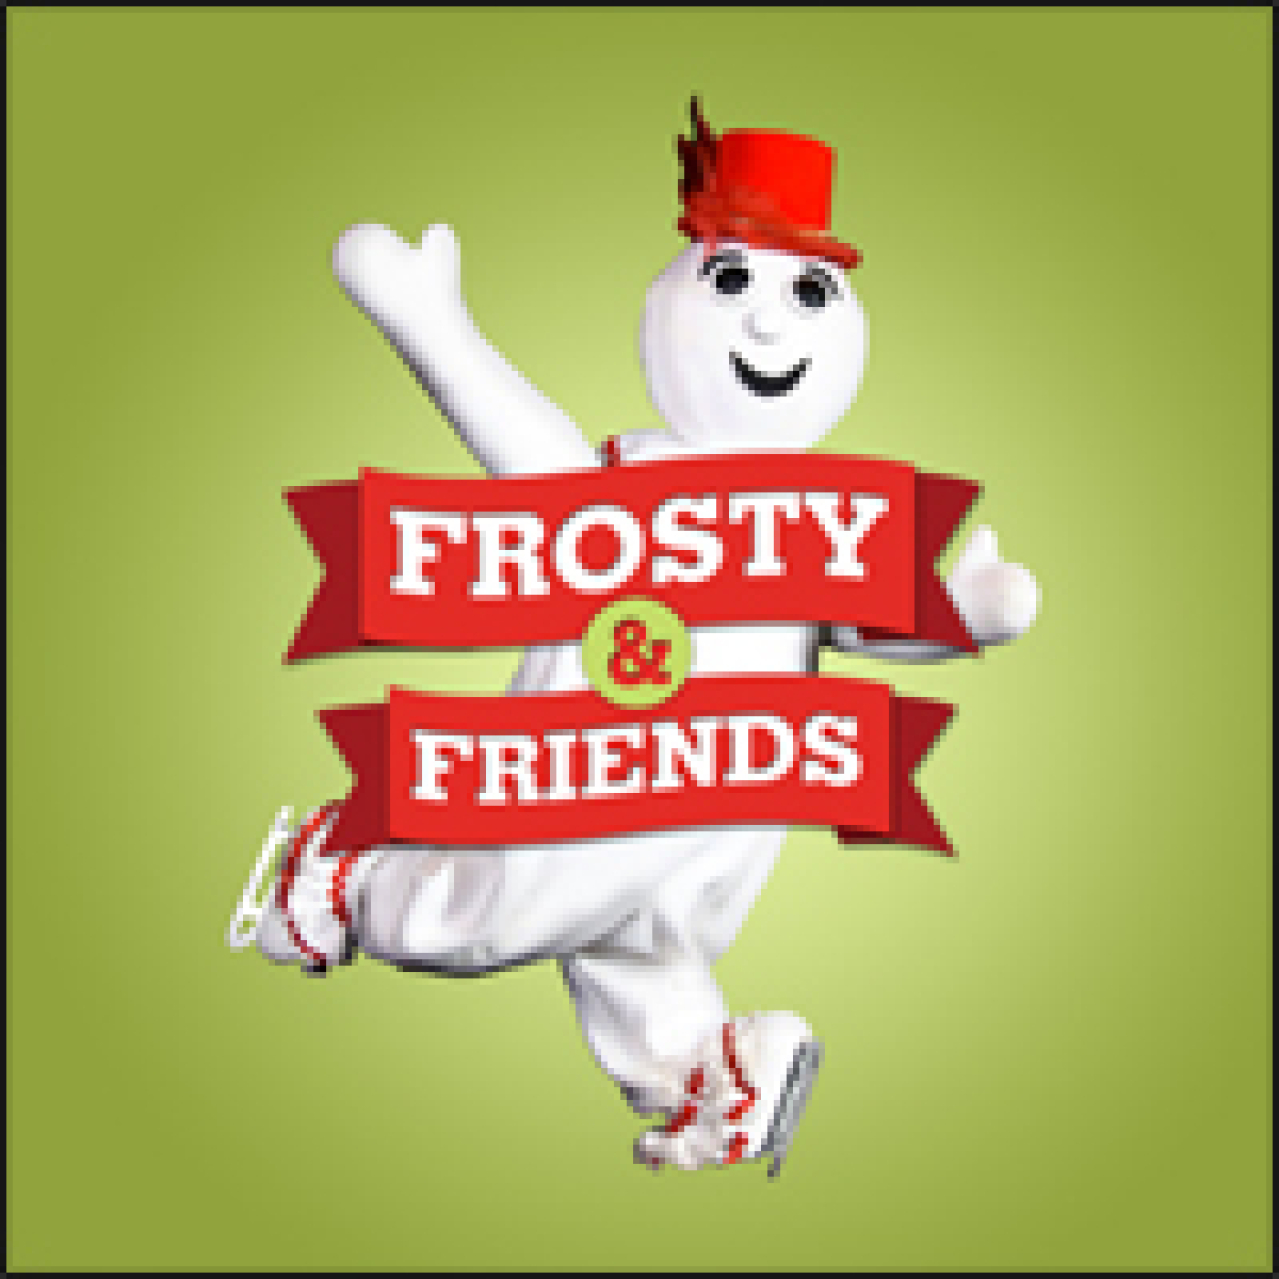 frosty friends logo Broadway shows and tickets